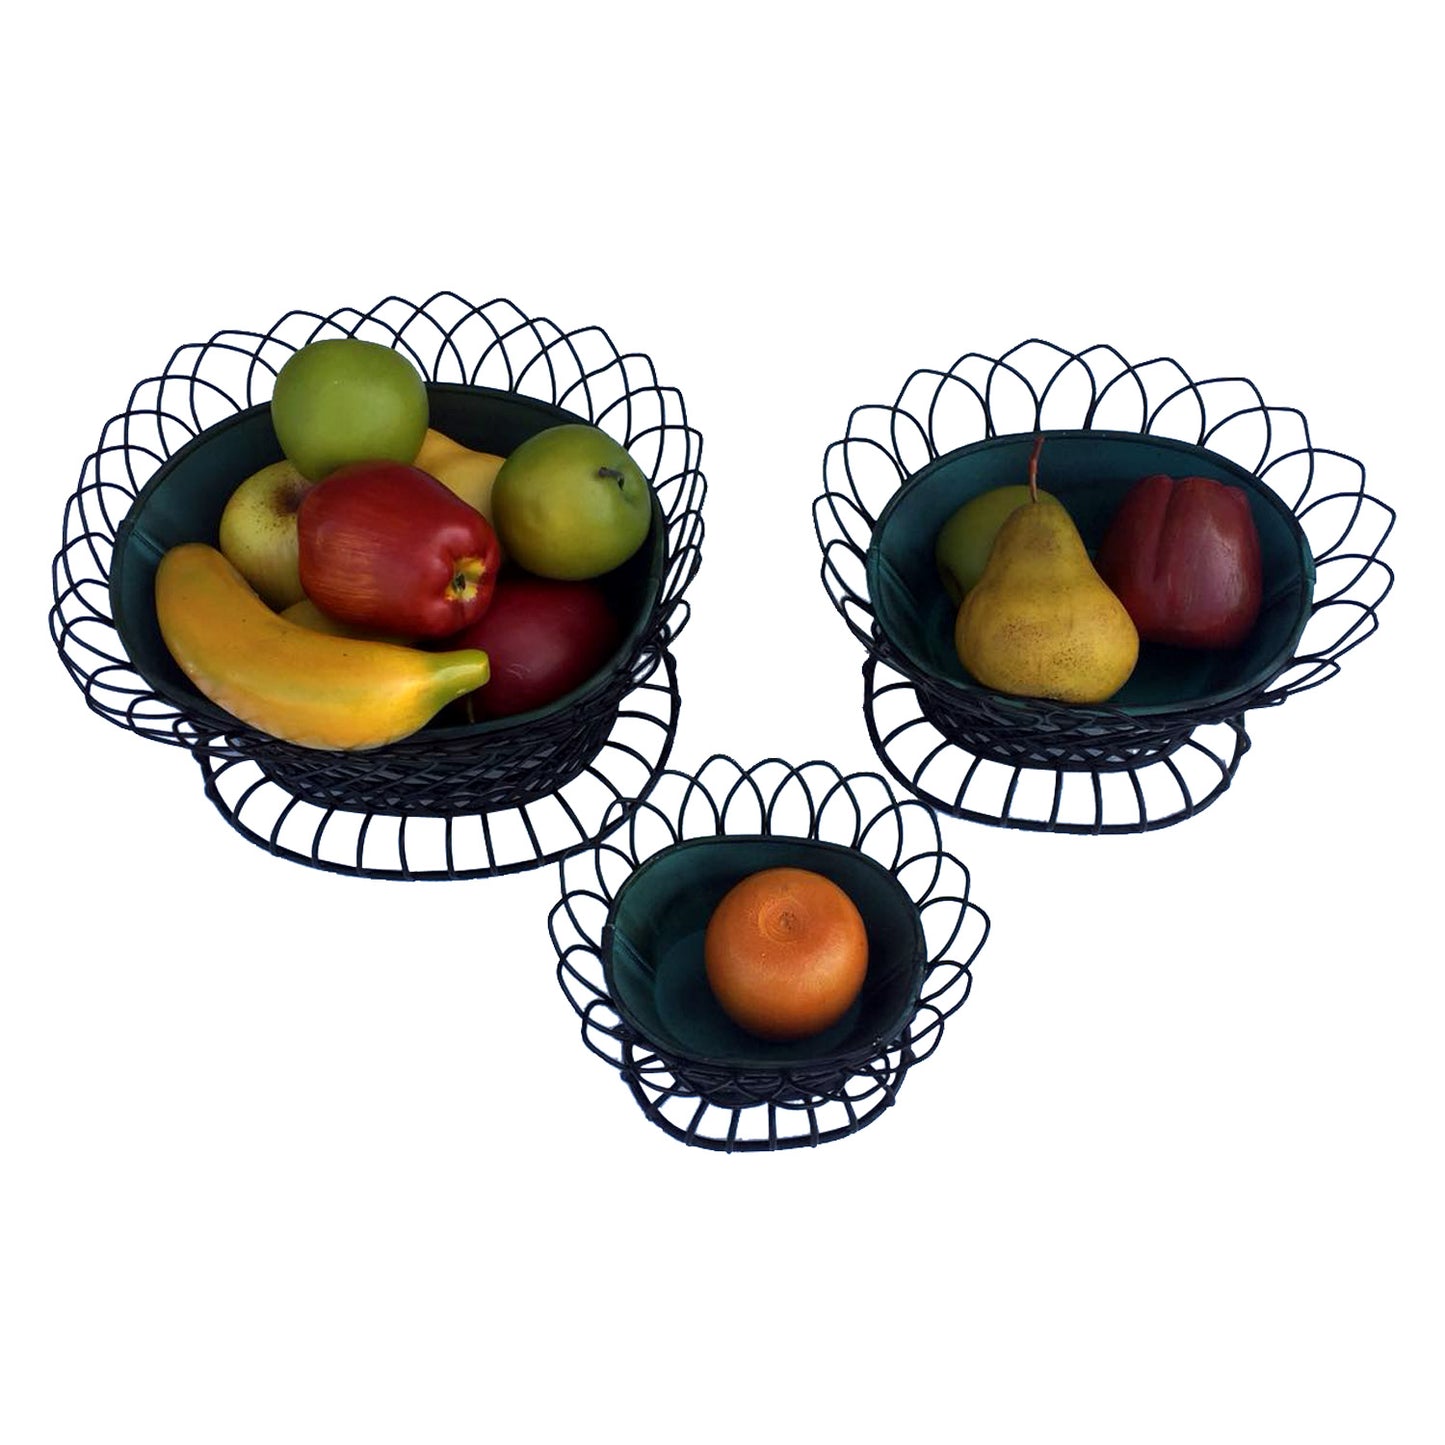 GiftBay 810-BG(S/3) Basket / Pot 3 Piece Set, Removable Pots in a Very Strong Wire Cage